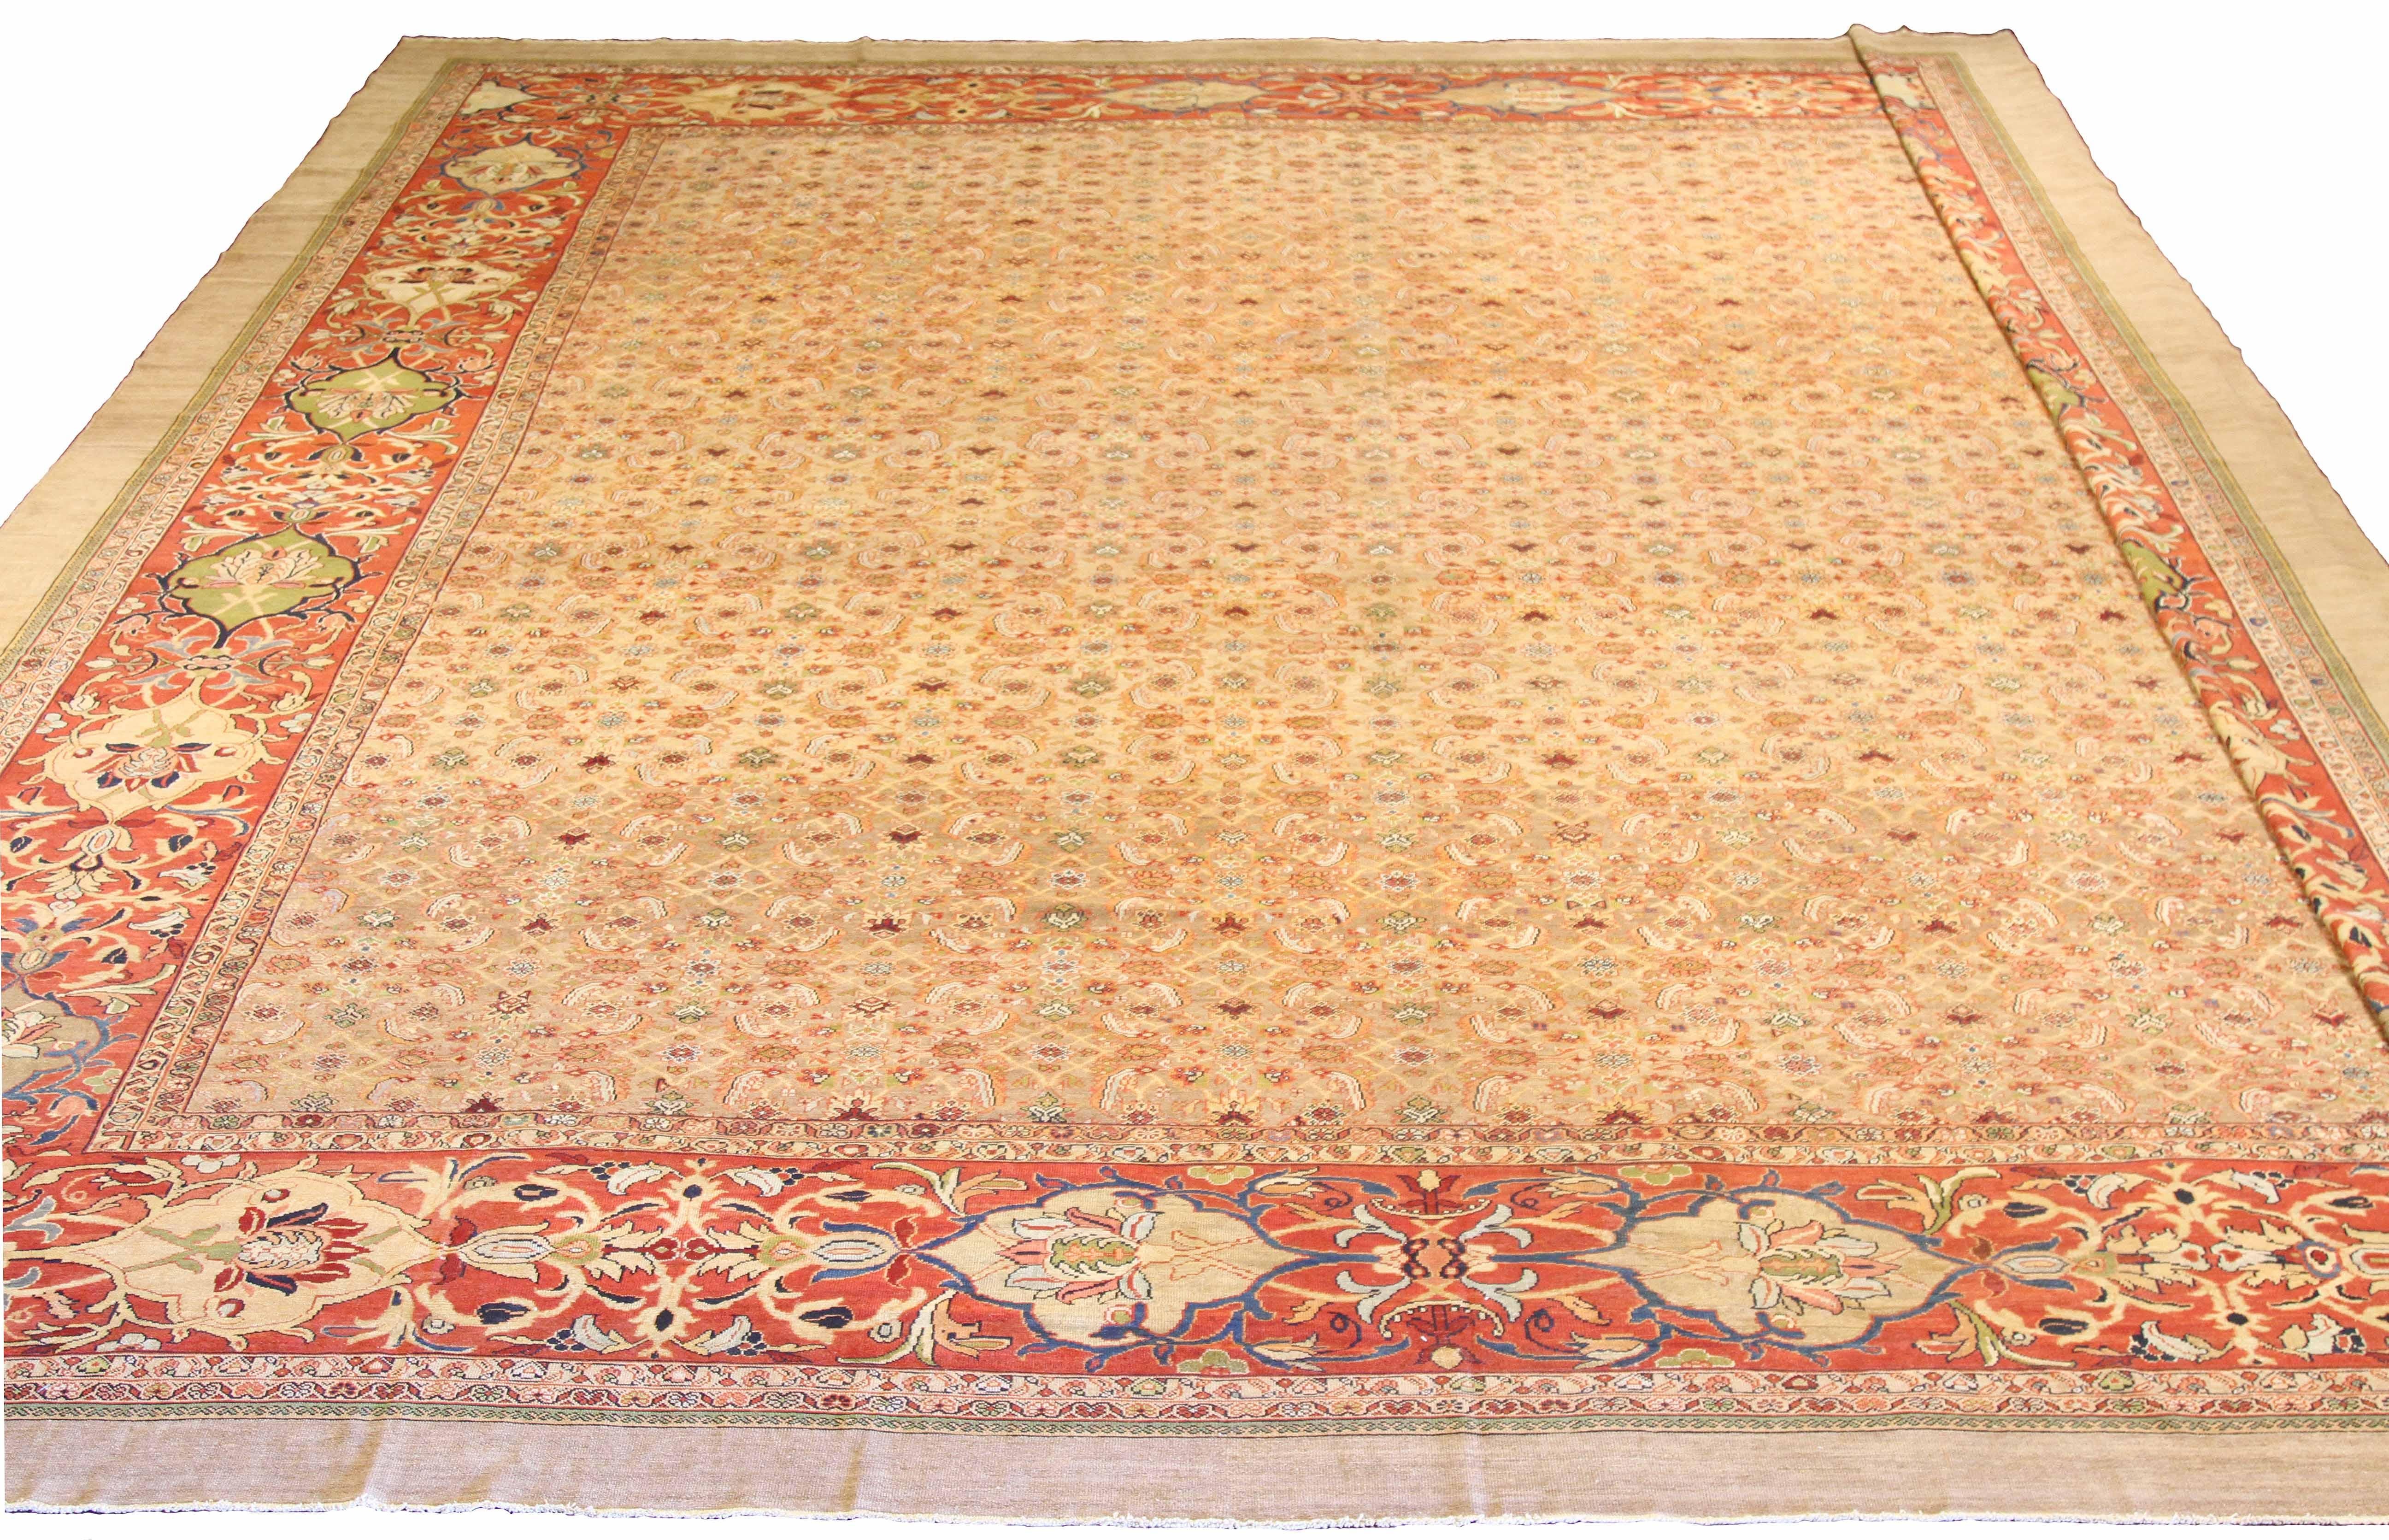 Oversized handmade Persian area rug from high-quality sheep’s wool and colored with eco-friendly vegetable dyes that are proven safe for humans and pets alike. It’s a Classic Sultanabad design showcasing a regal ivory field with prominent Herati